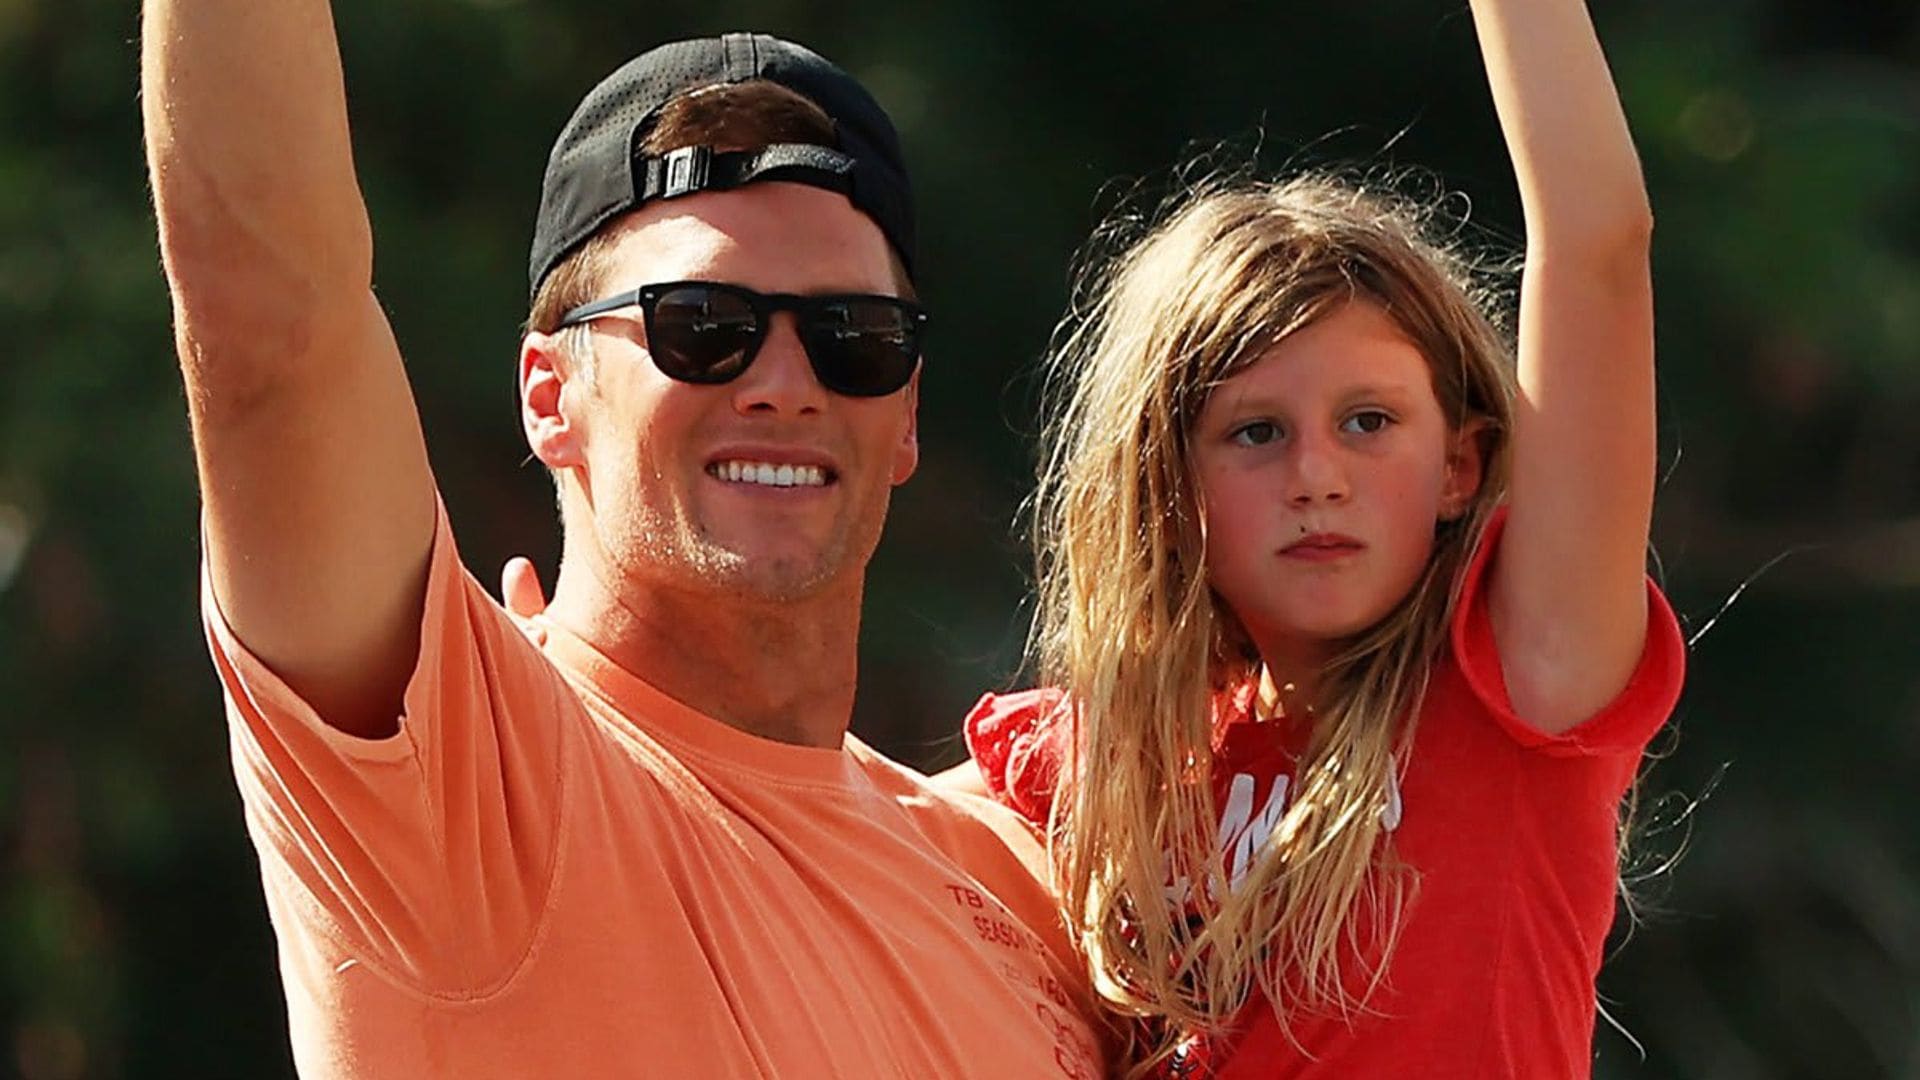 You have to see Tom Brady's daughter's reaction to him throwing the Super Bowl trophy: 'Dad, no!'